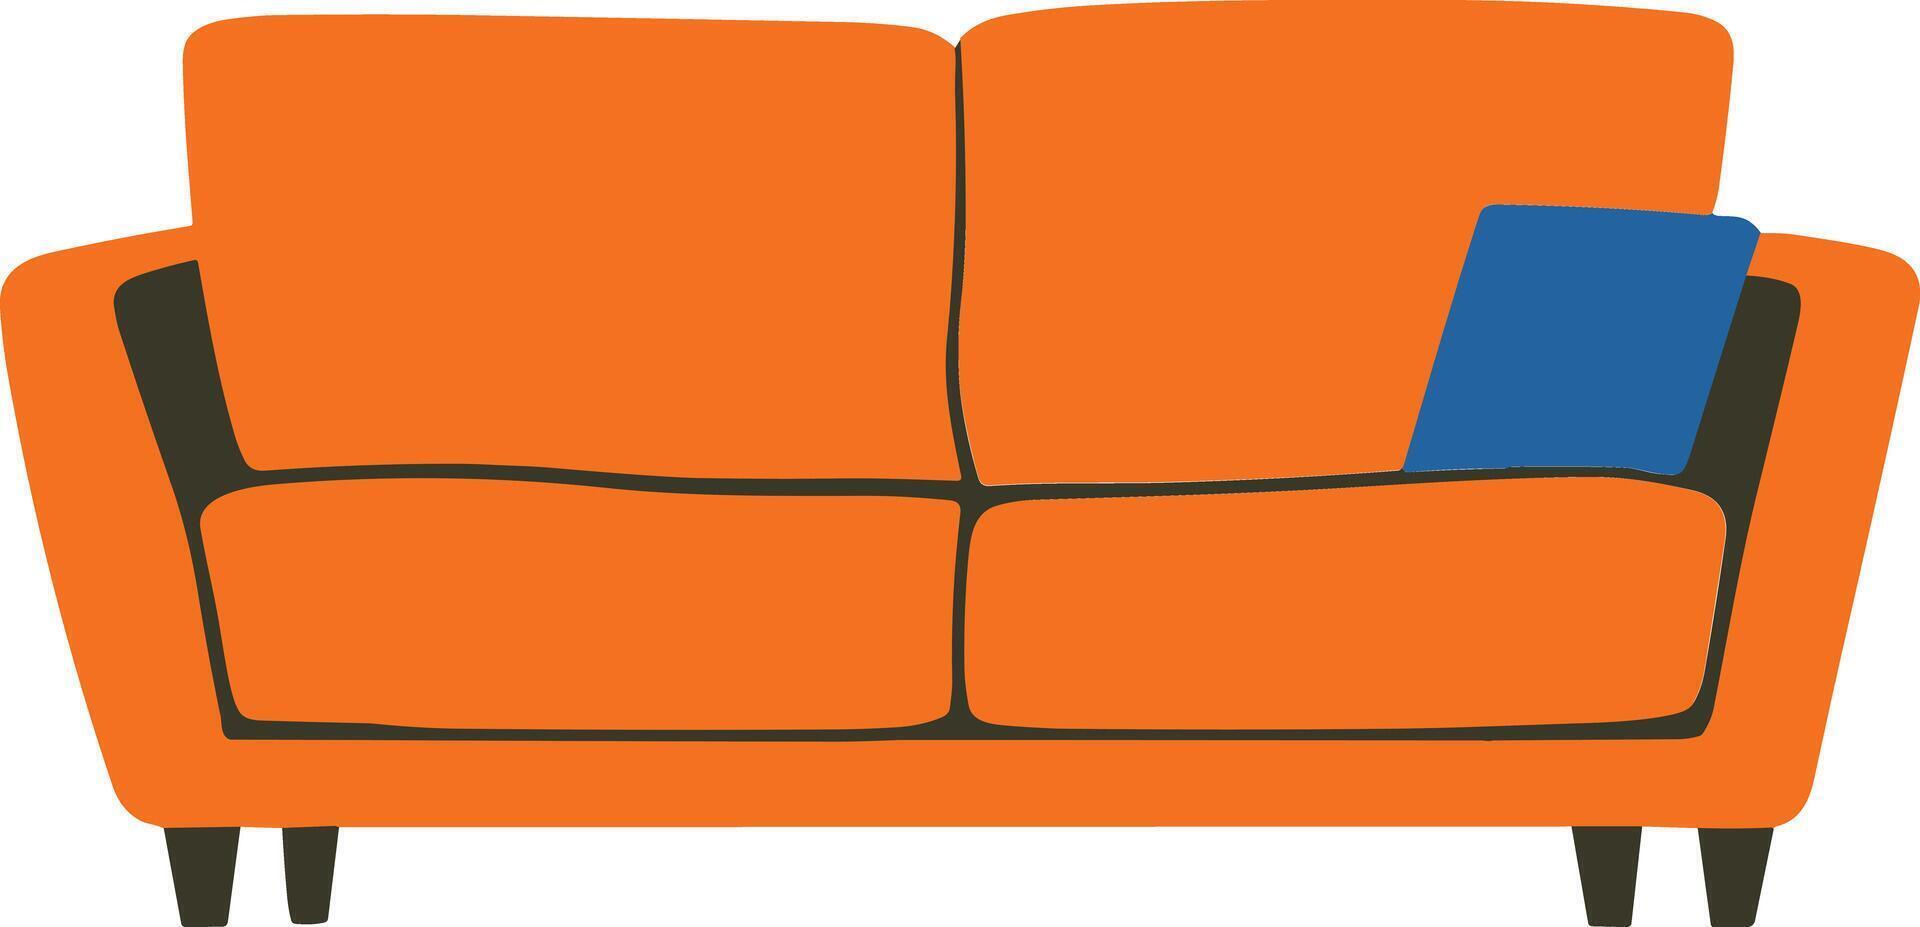 couch flat style isolate on background vector